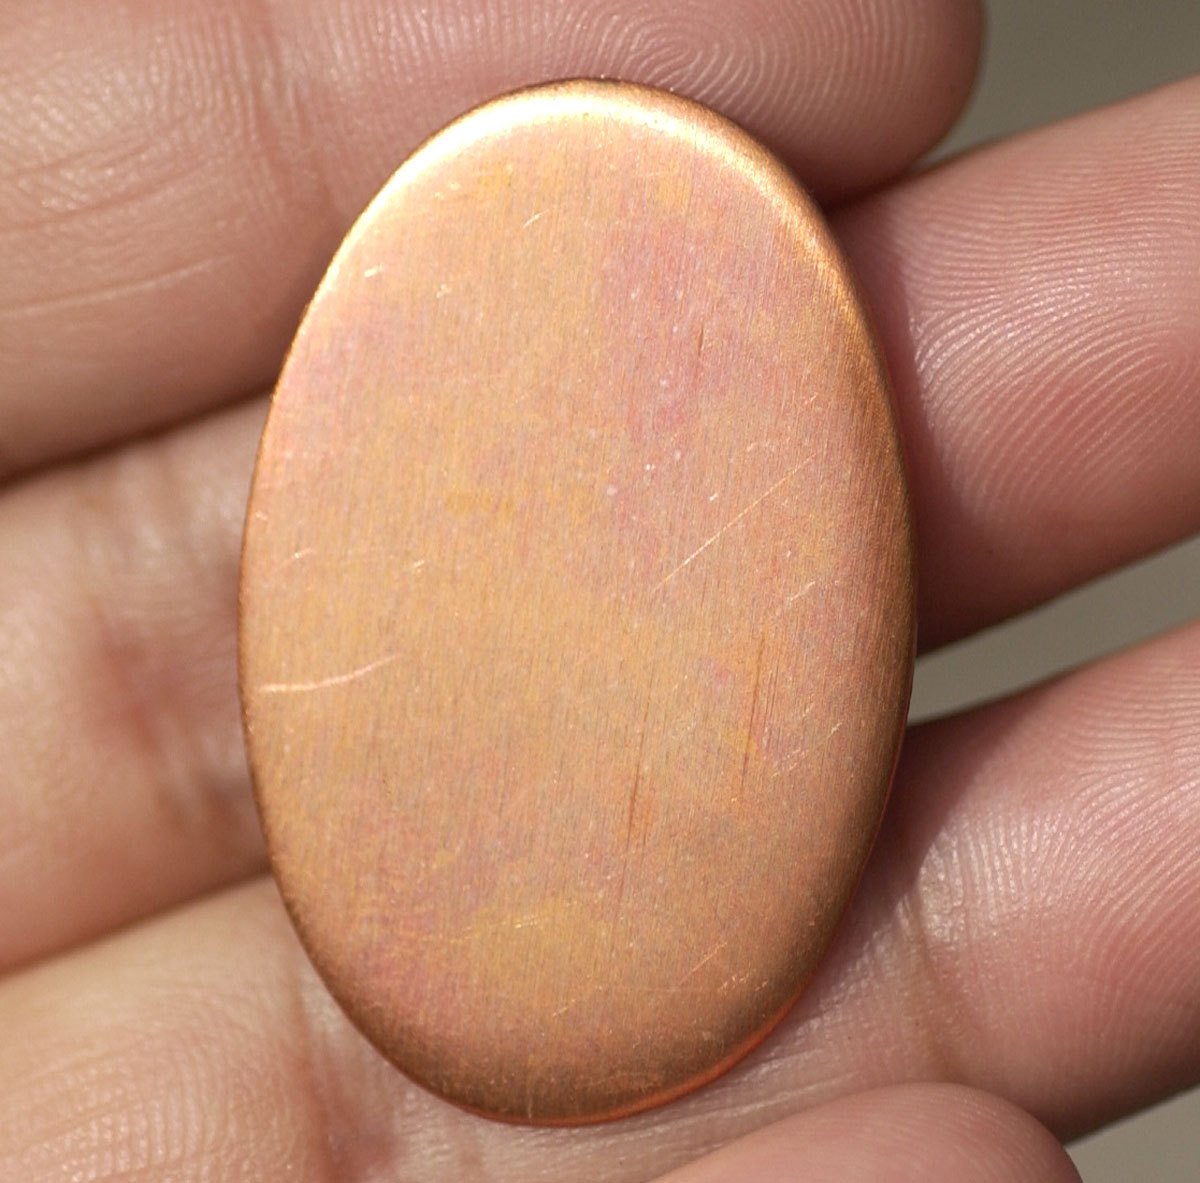 Oval 34mm x 22mm 24g Blanks Shape for Enameling Stamping Texturing Variety of Metals